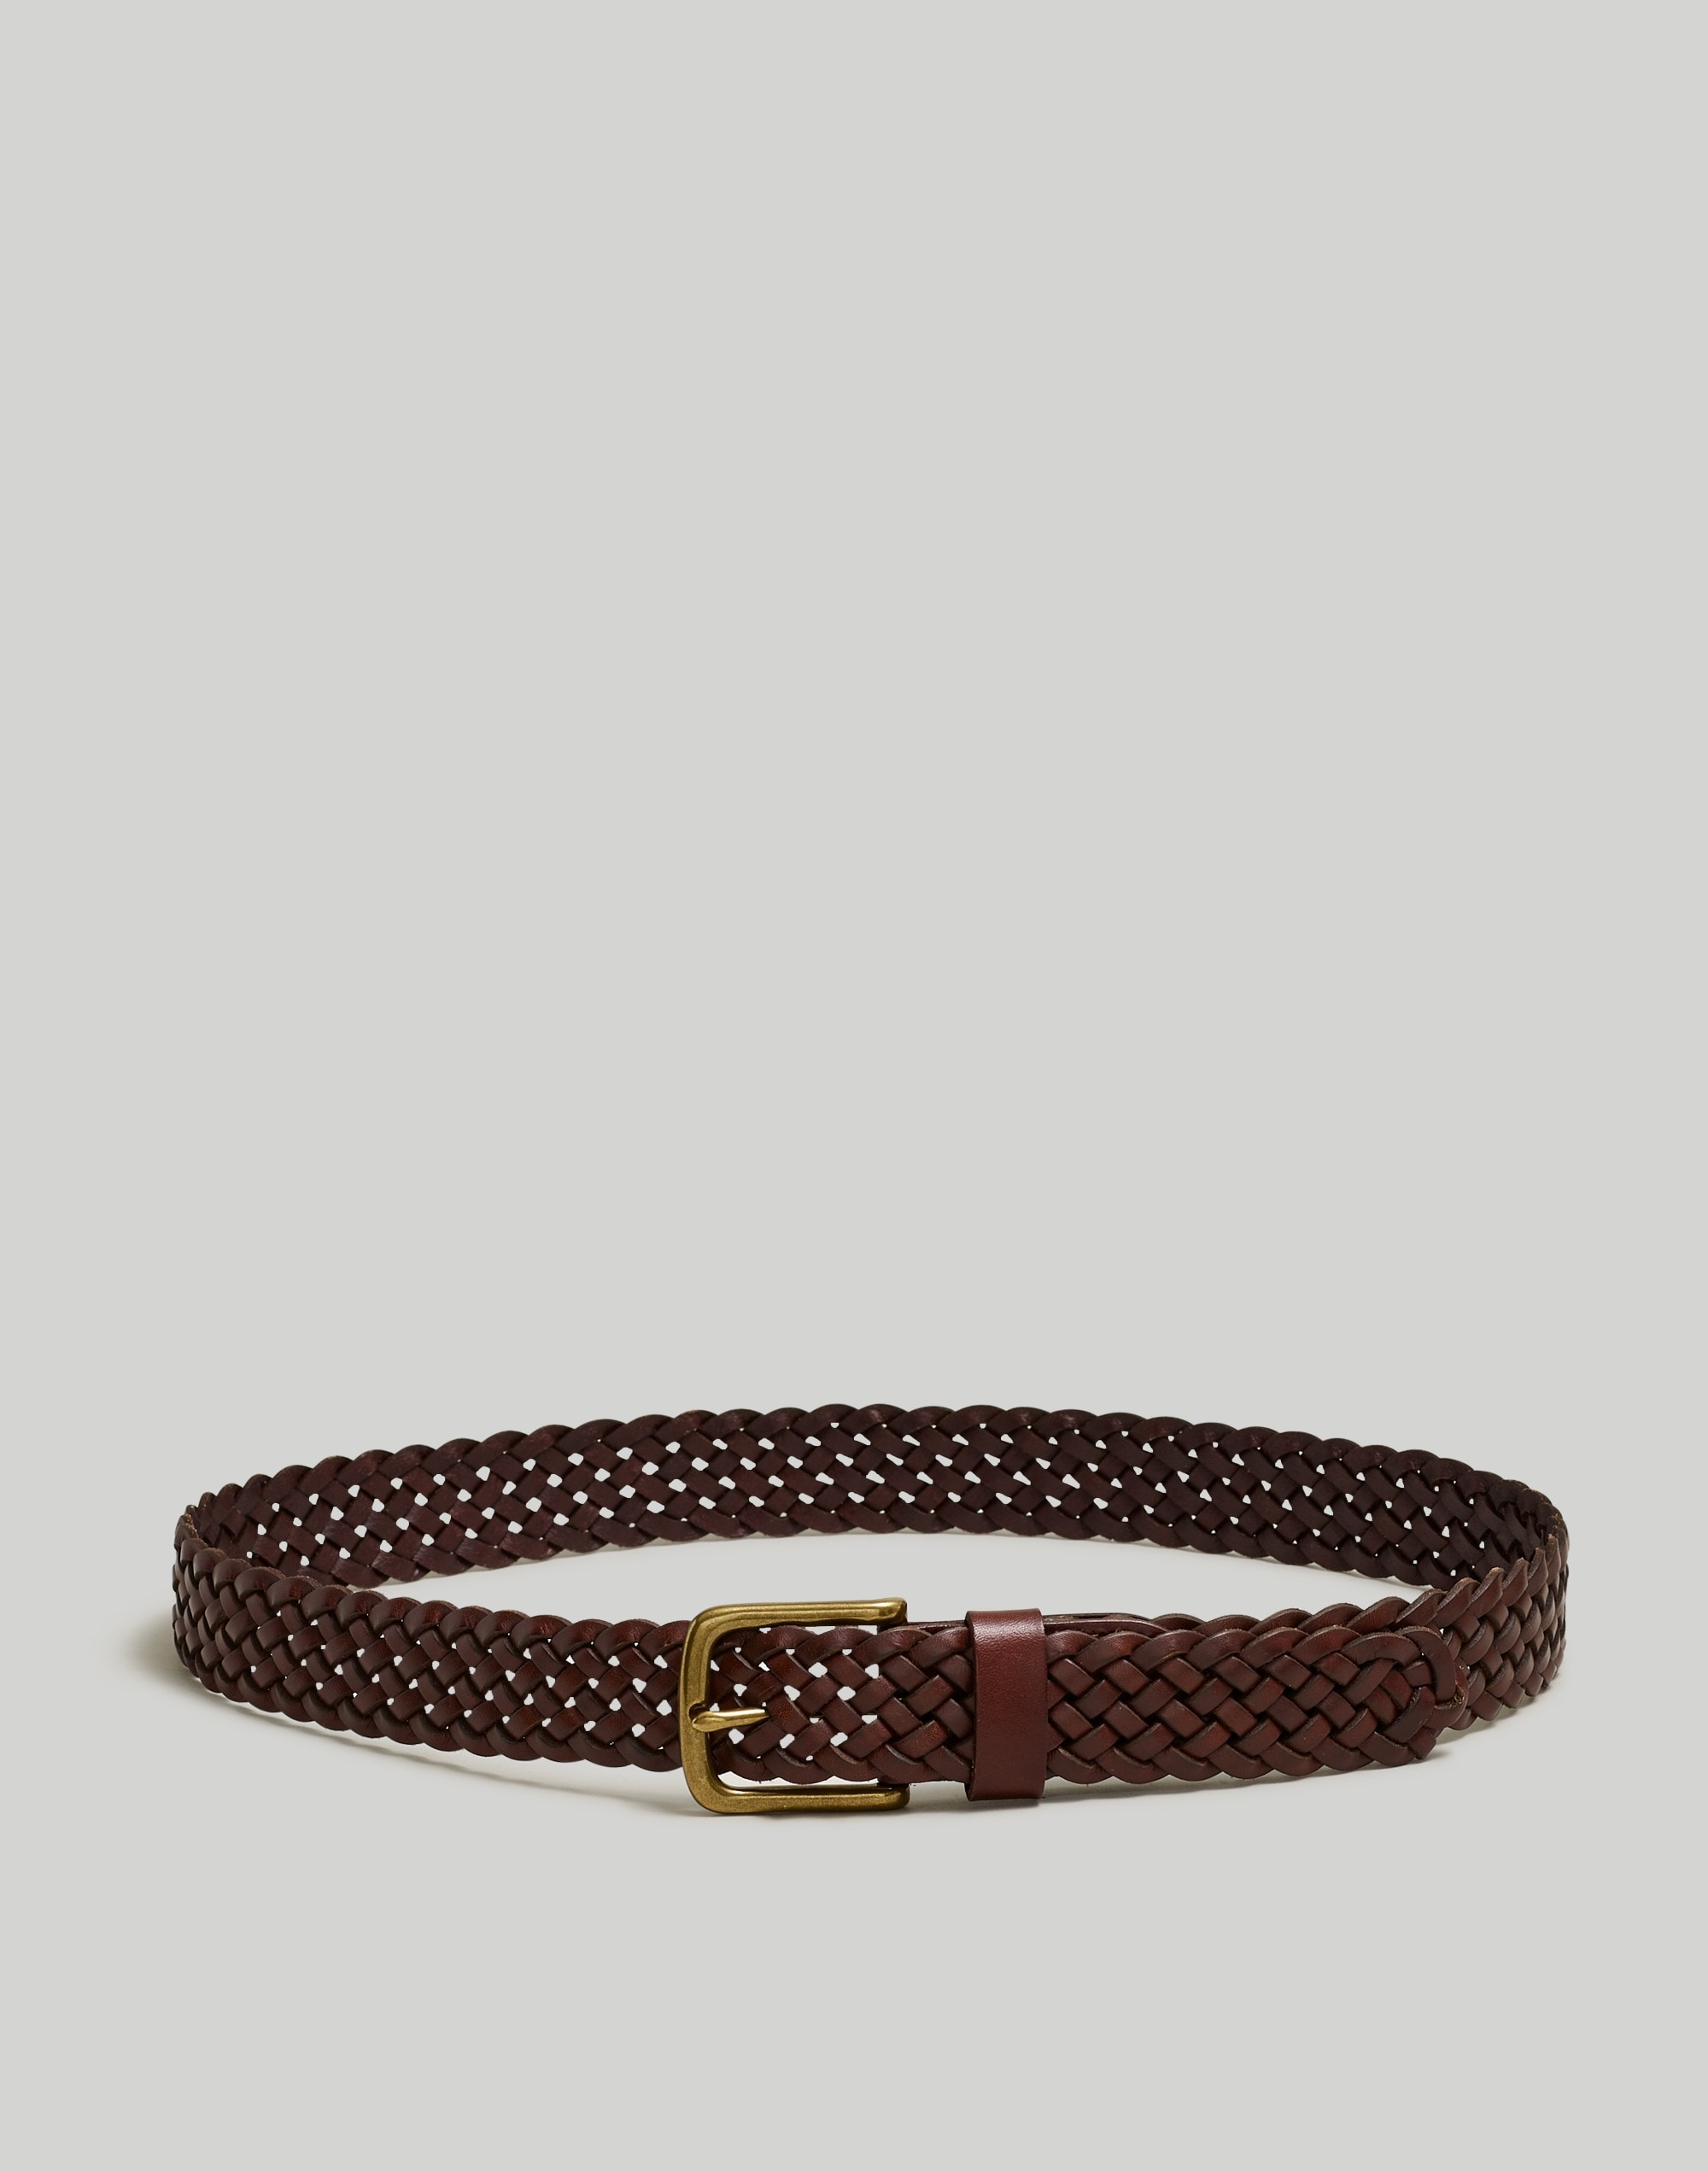 Mw Woven Leather Belt In Rich Brown